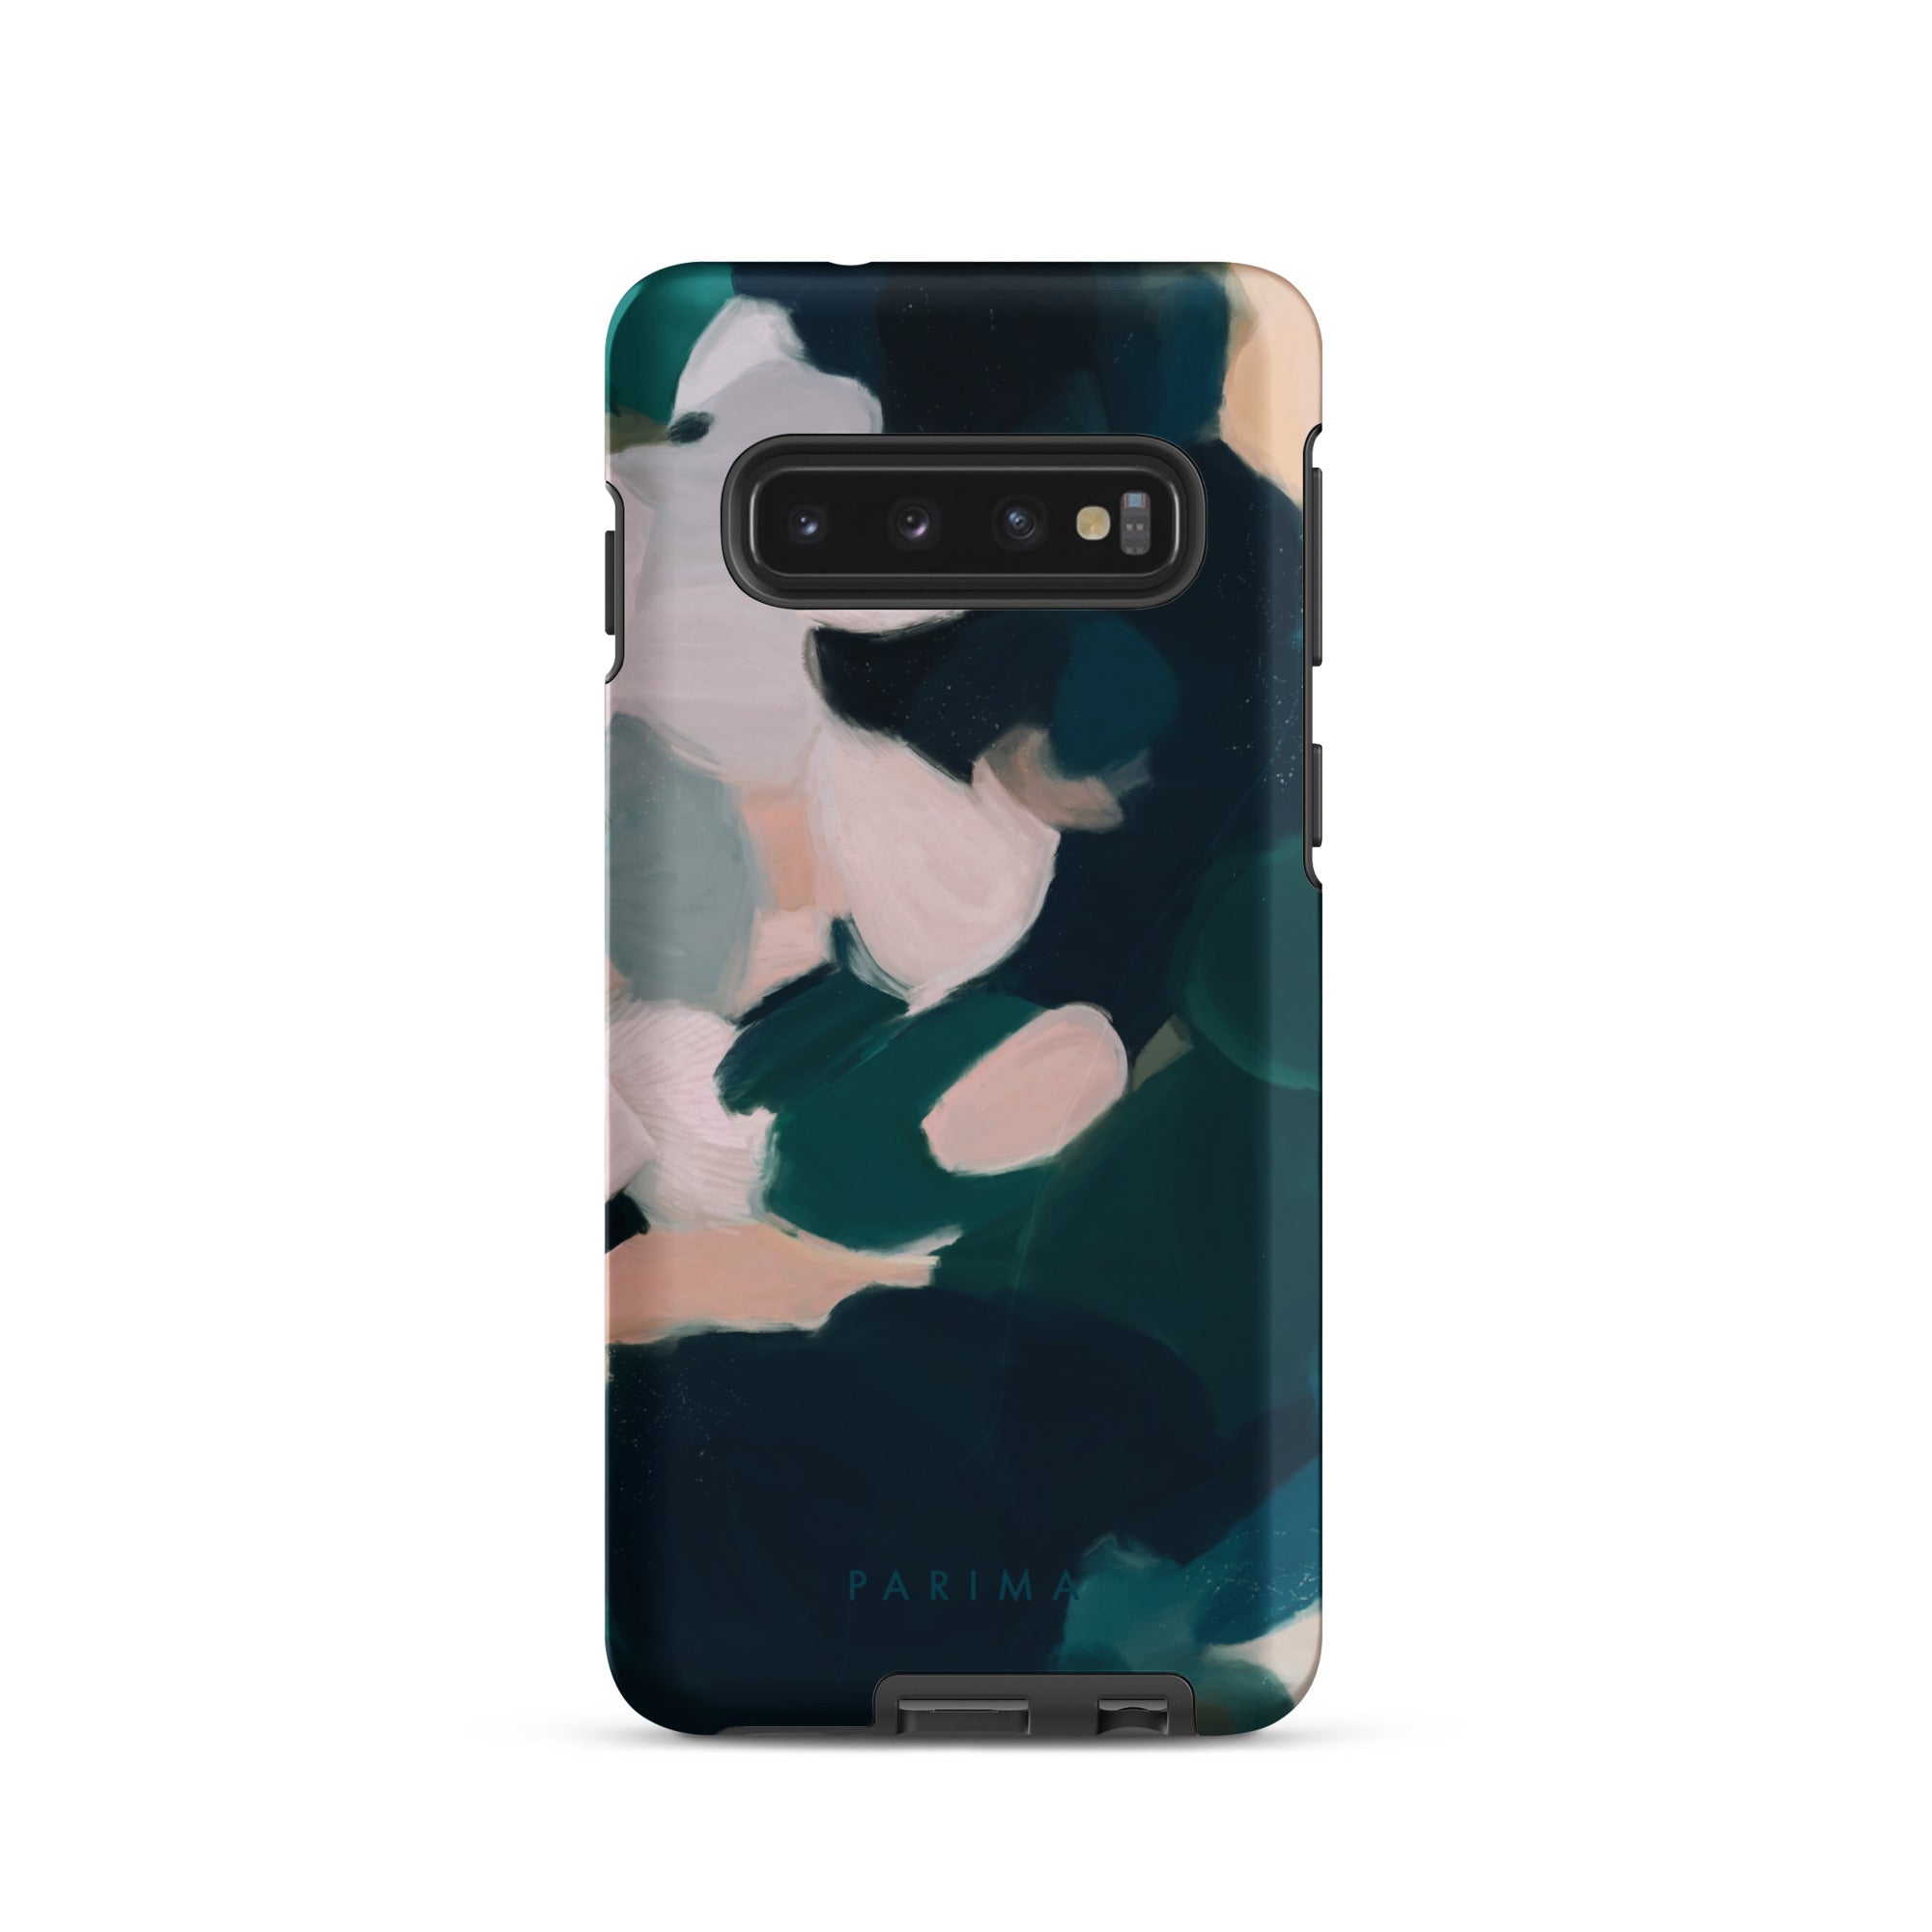 Aerwyn, green and pink abstract art on Samsung Galaxy S10 tough case by Parima Studio